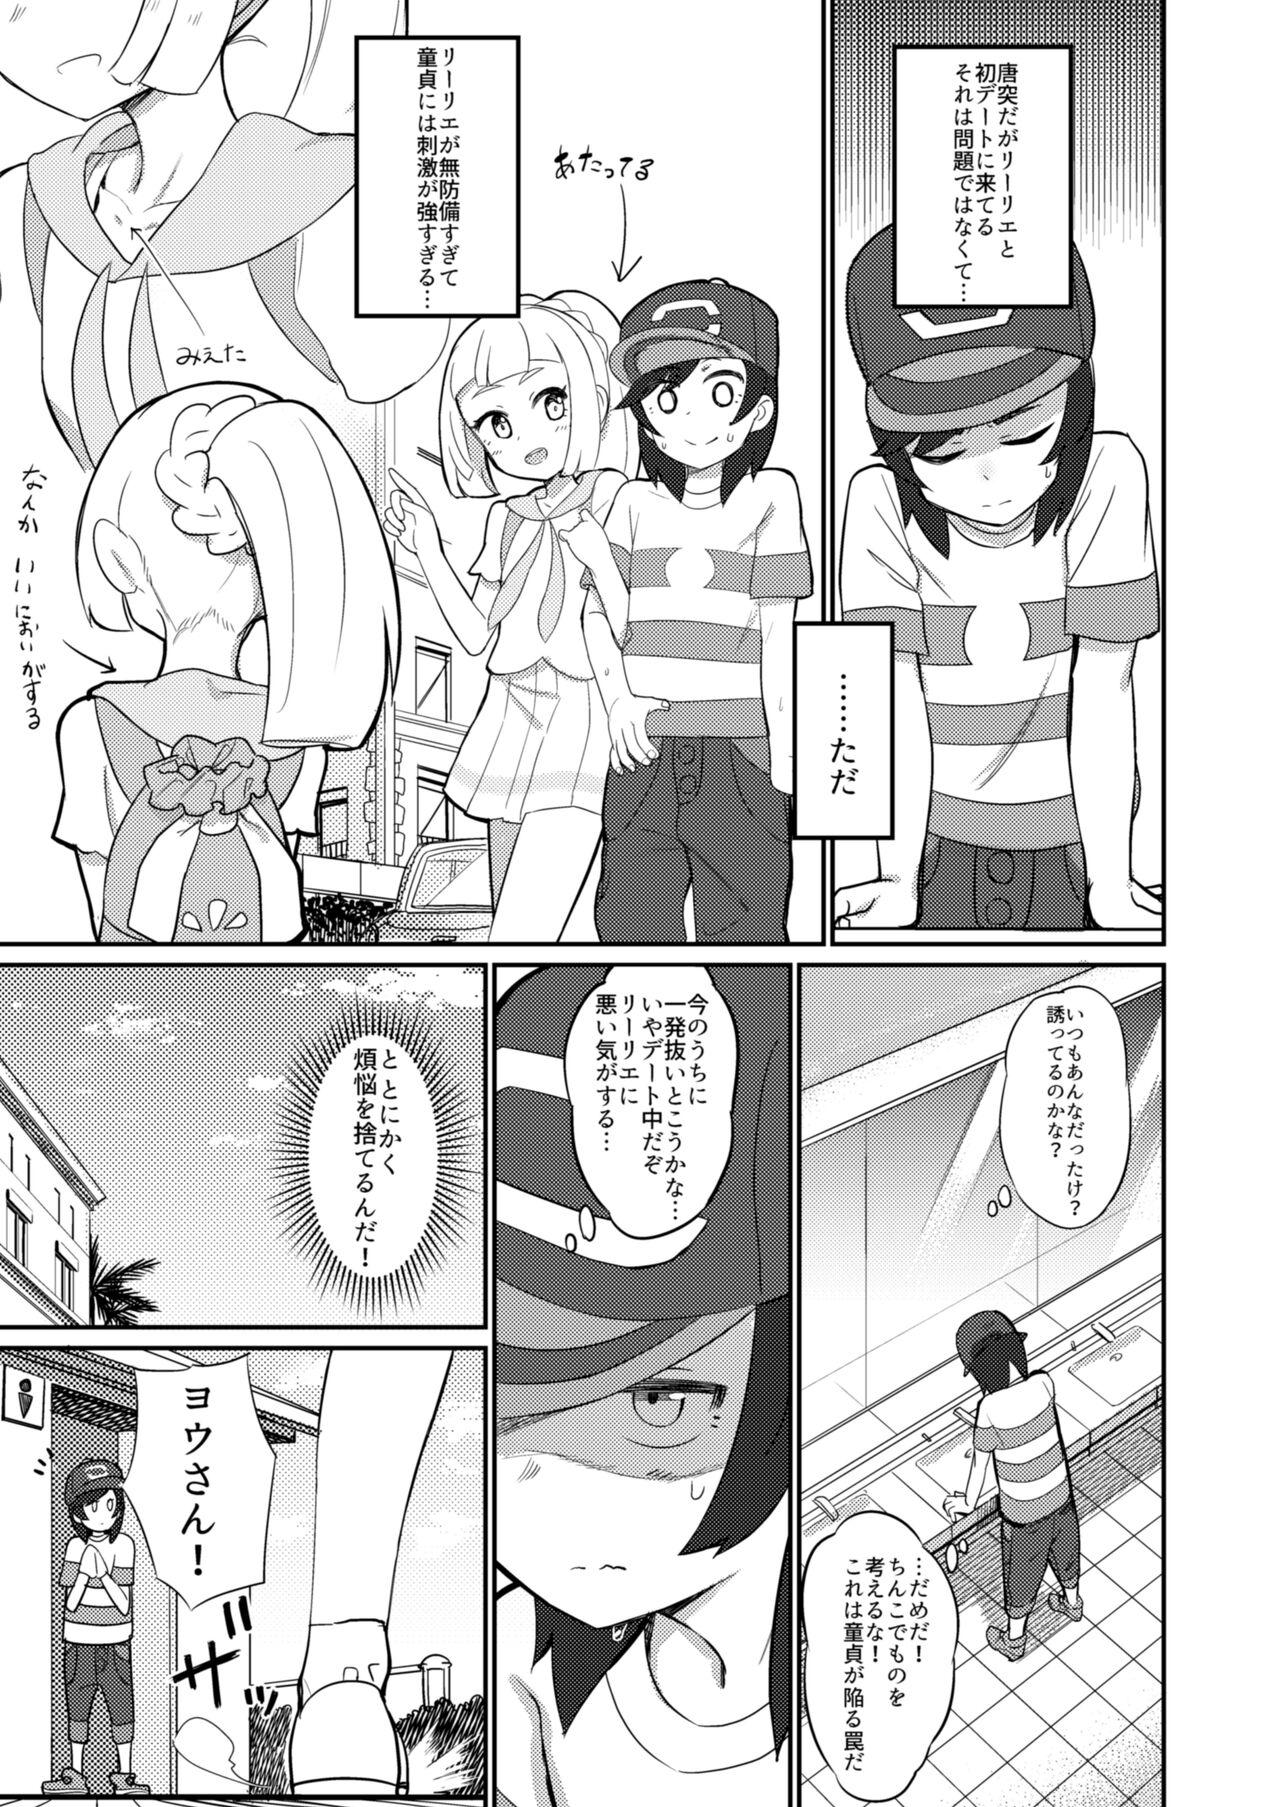 Exgf again and again - Pokemon | pocket monsters Pene - Page 5